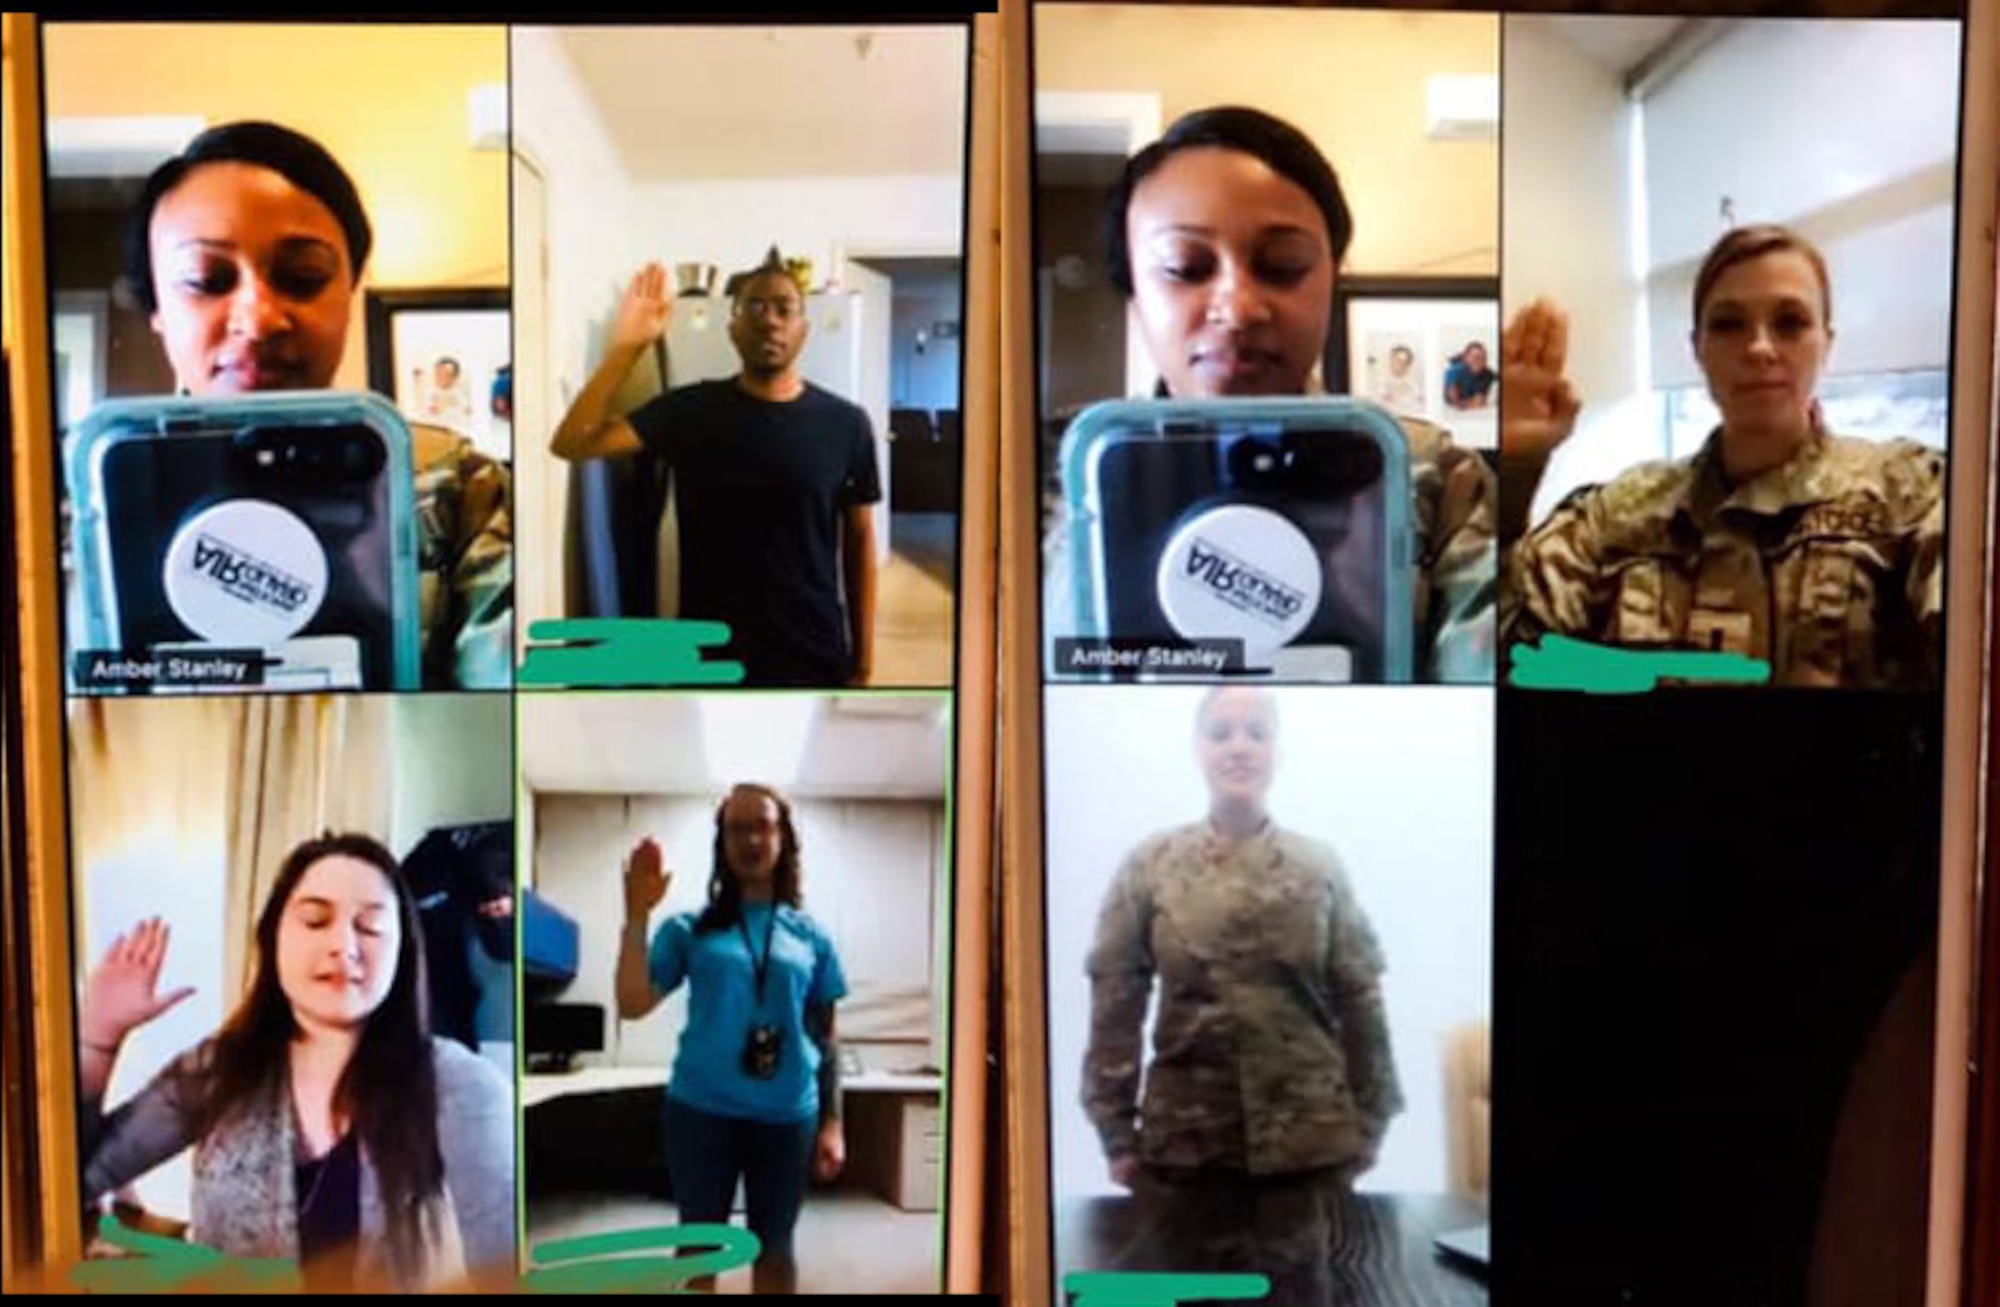 U.S. Air Force Tech. Sgts. Lauren Trail and Amber Stanley, recruiters with the Georgia Air National Guard, use video chat to conduct enlistments March 19, 2020. The recruiters turned to virtual, encrypted platforms to handle paperwork and video chats for in-person meetings to work from home during the COVID-19 shelter-in-place order from the governor. (U.S. Air National Guard photographic by Master Sgt. Nancy Goldberger)